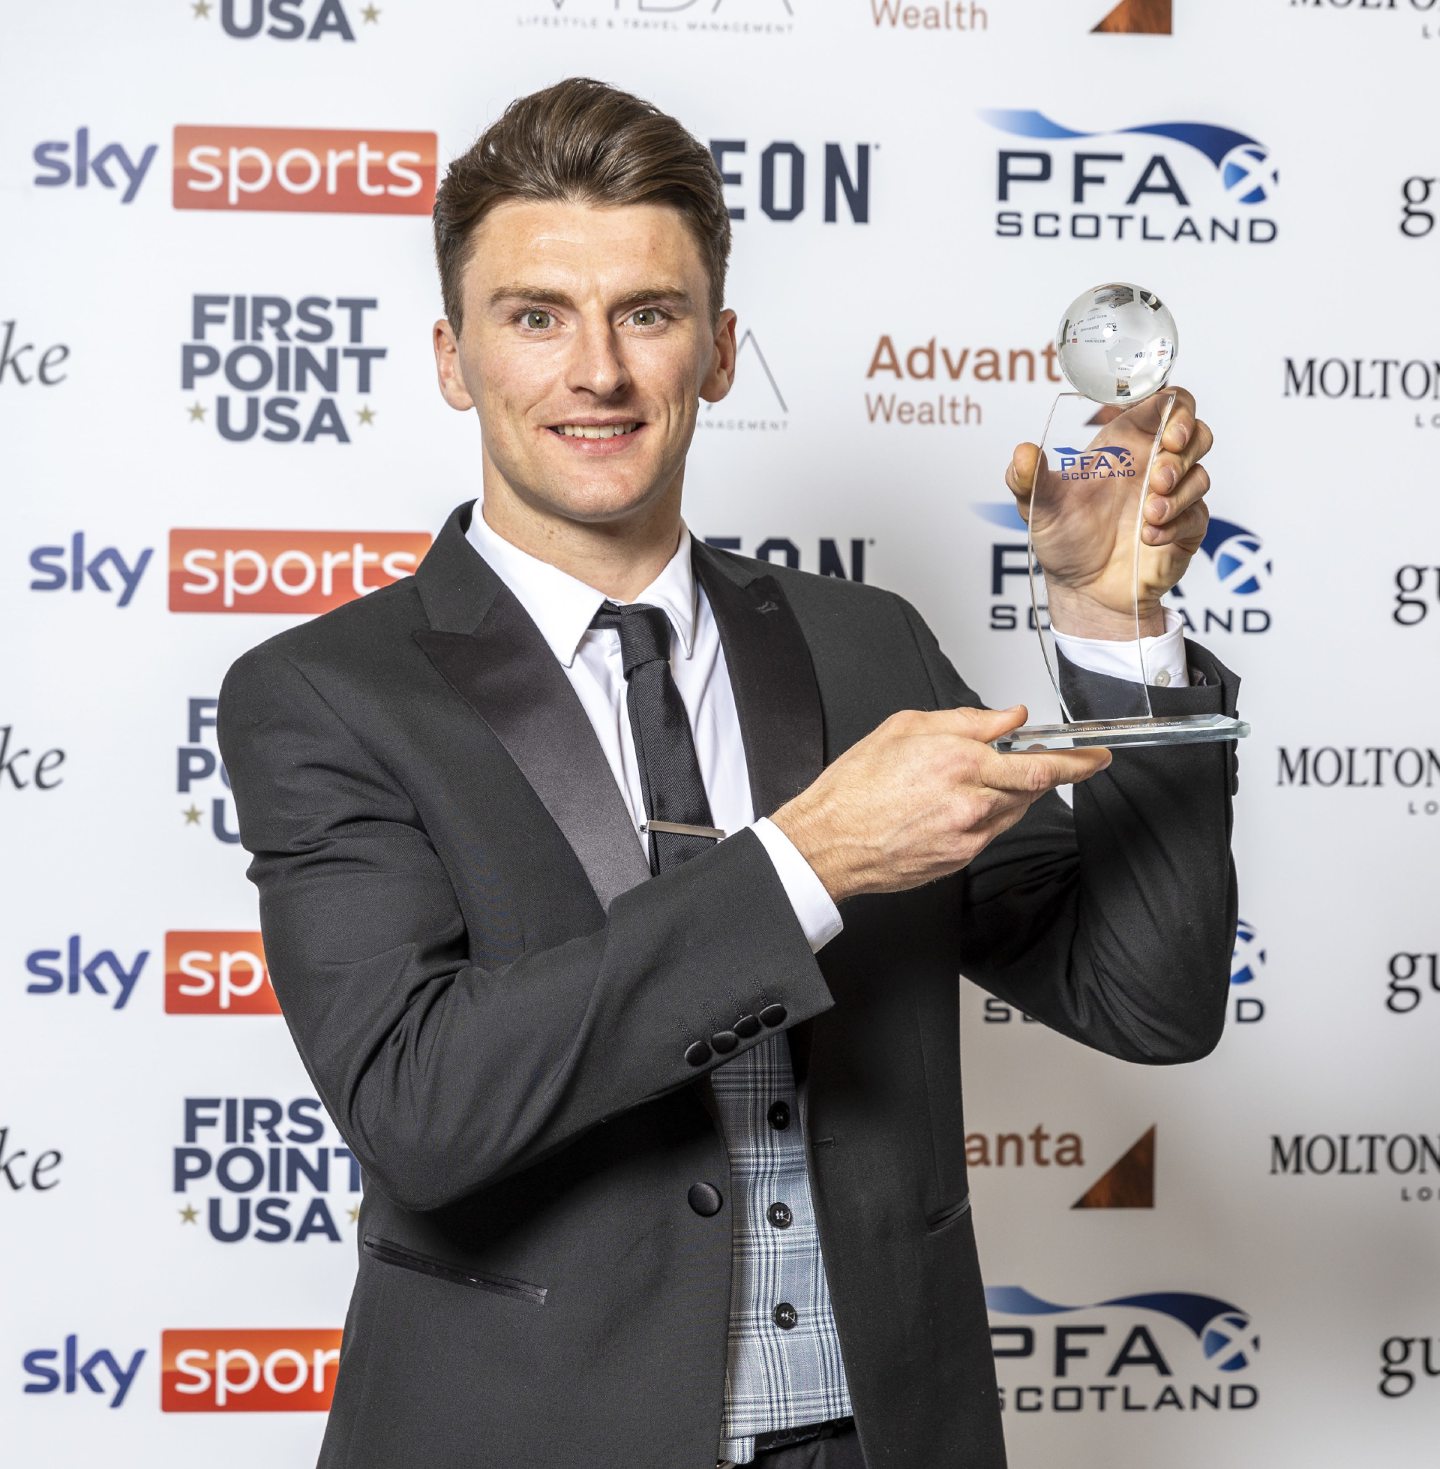 McKenna was last season's PFA and SPFL Championship Player of the Year. Image: Andrew Barr/Handout/PA Wire. 